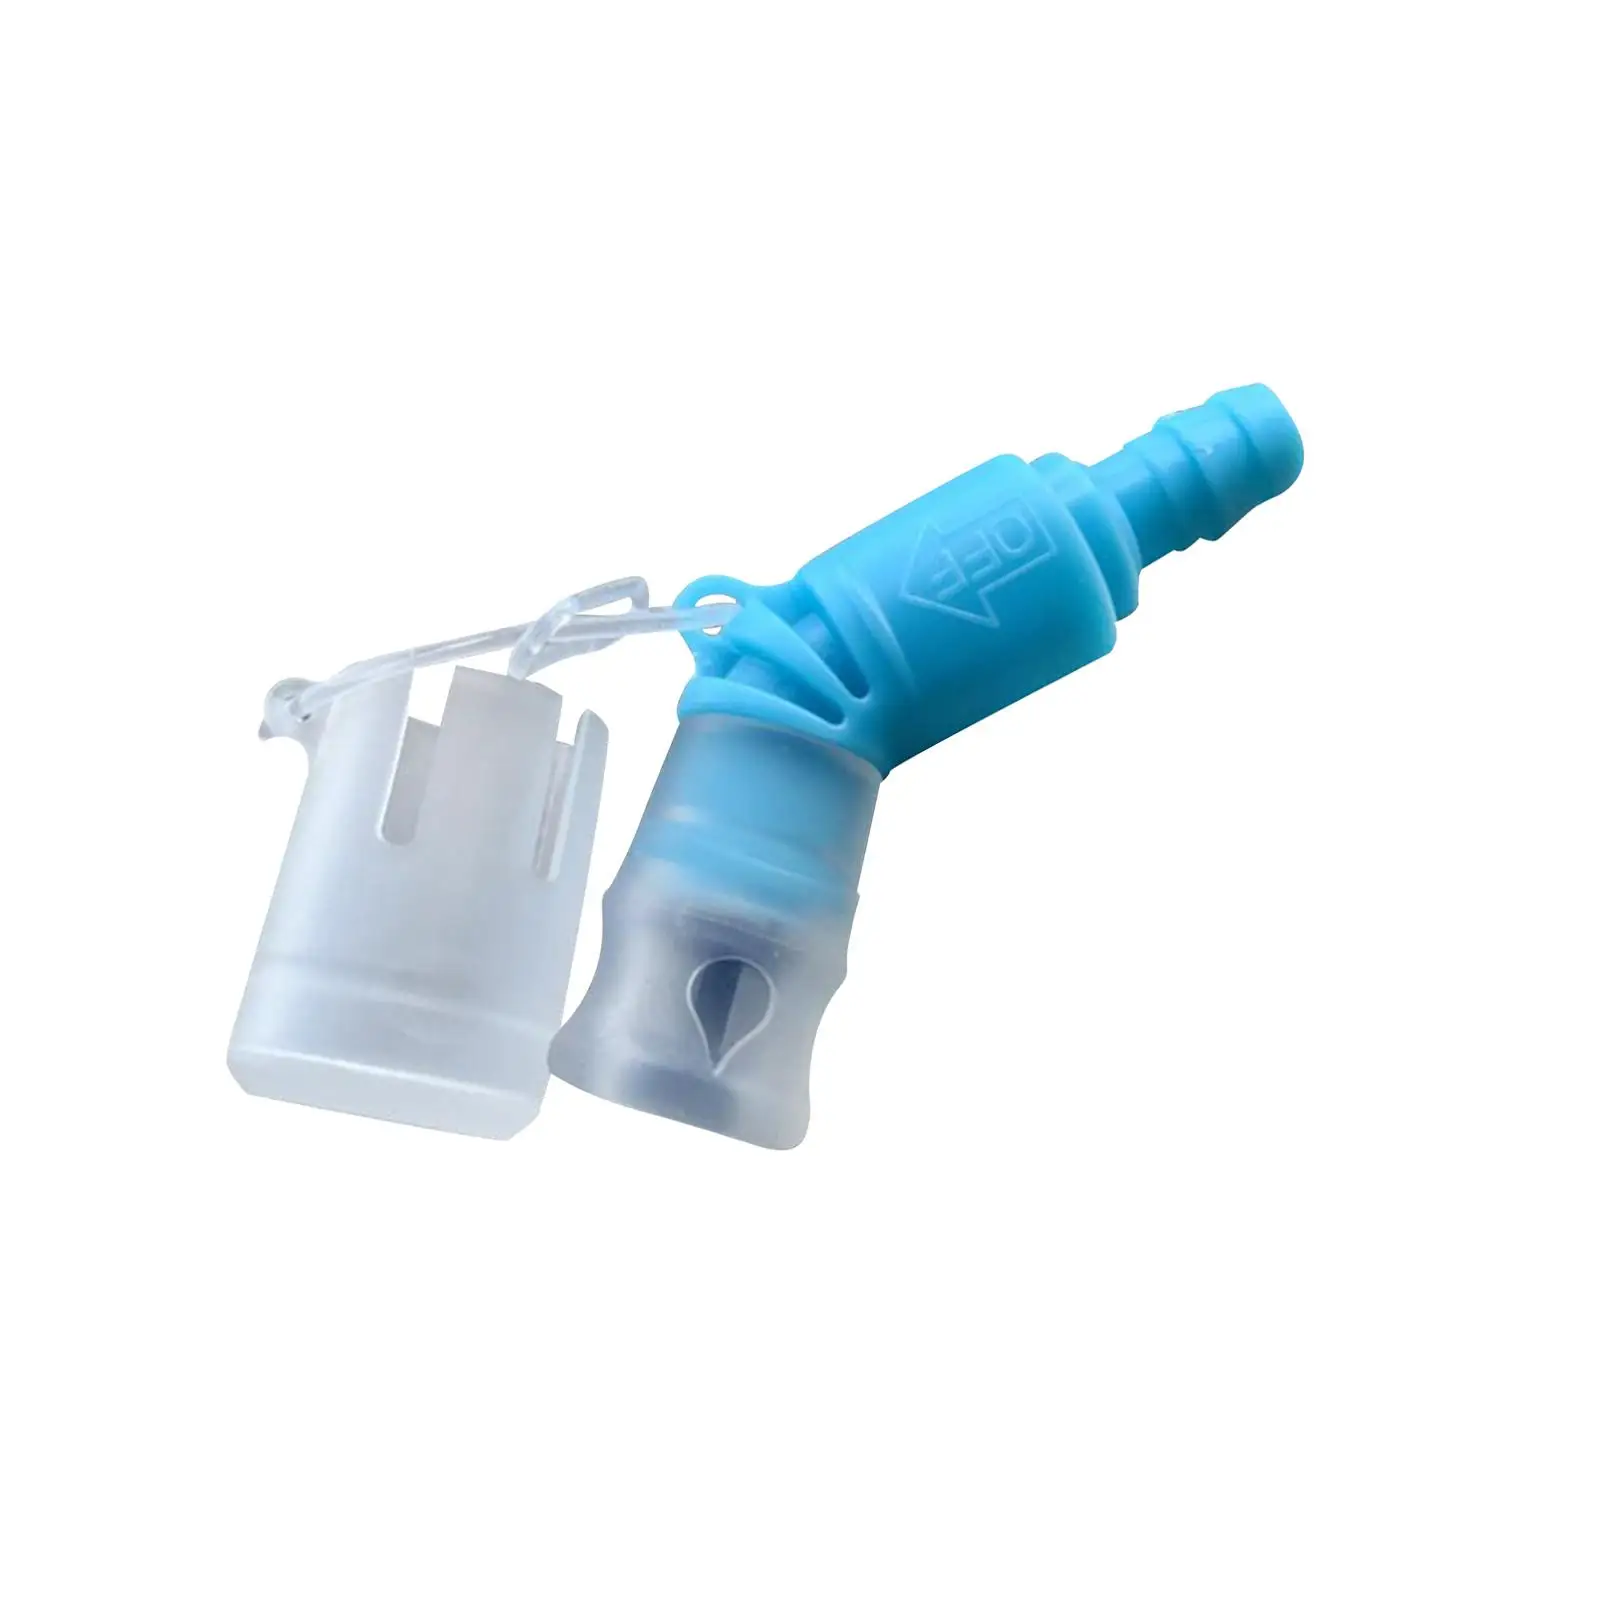 Outdoor Sports Water Bag Bite Valve with Dustproof Cover Replacement Water Outlet Mouthpiece Shutoff Valve Nozzle Easily Drink